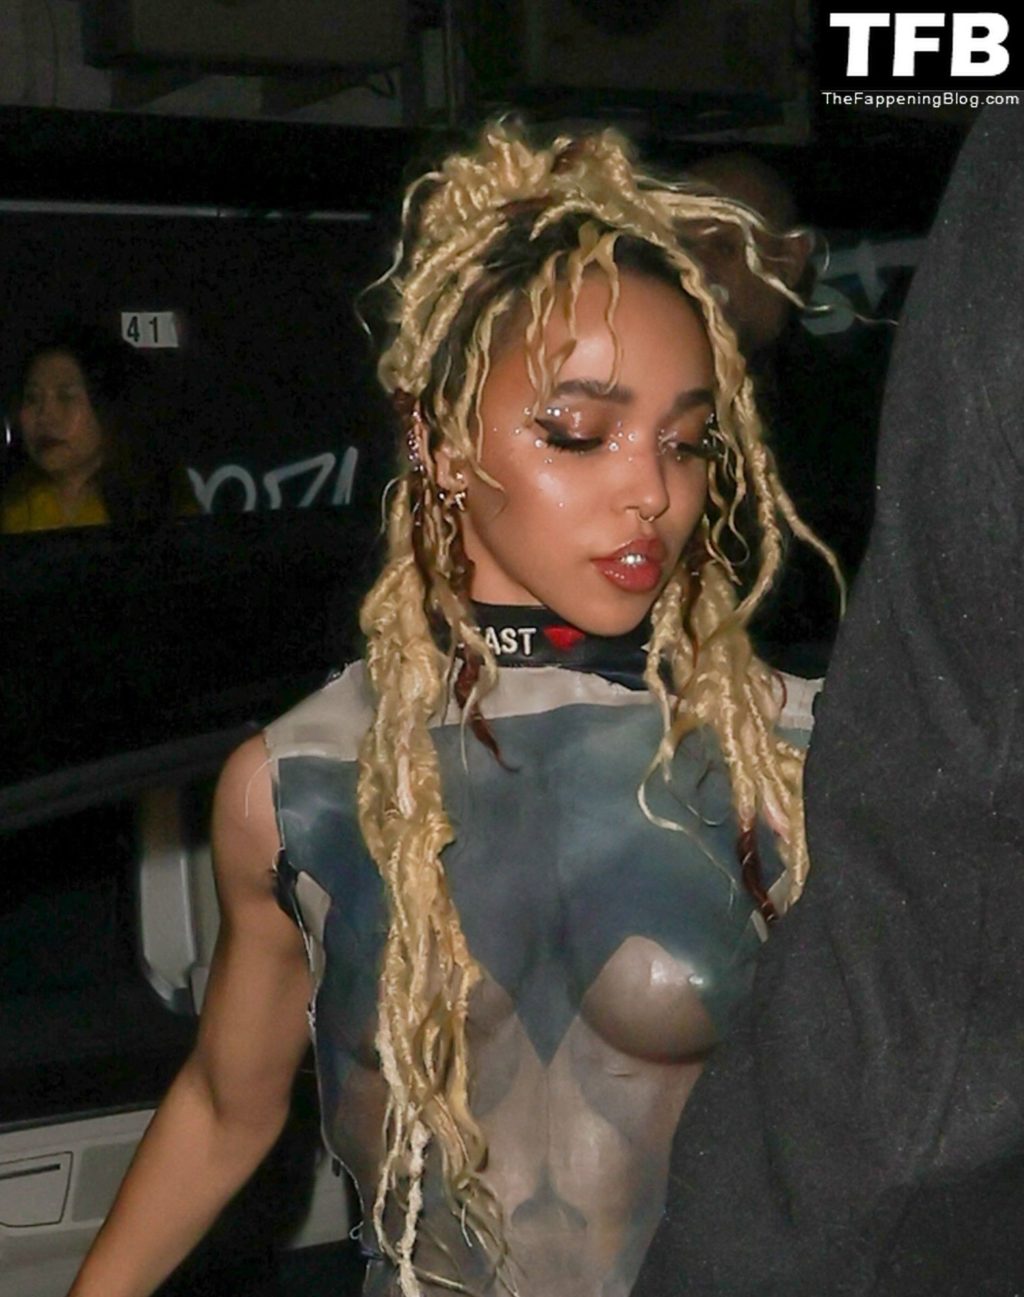 FKA Twigs Nude The Fappening Blog 12 1024x1297 - FKA Twigs Flashes Her Nude Tits & Legs the NME Awards in London (14 Photos)